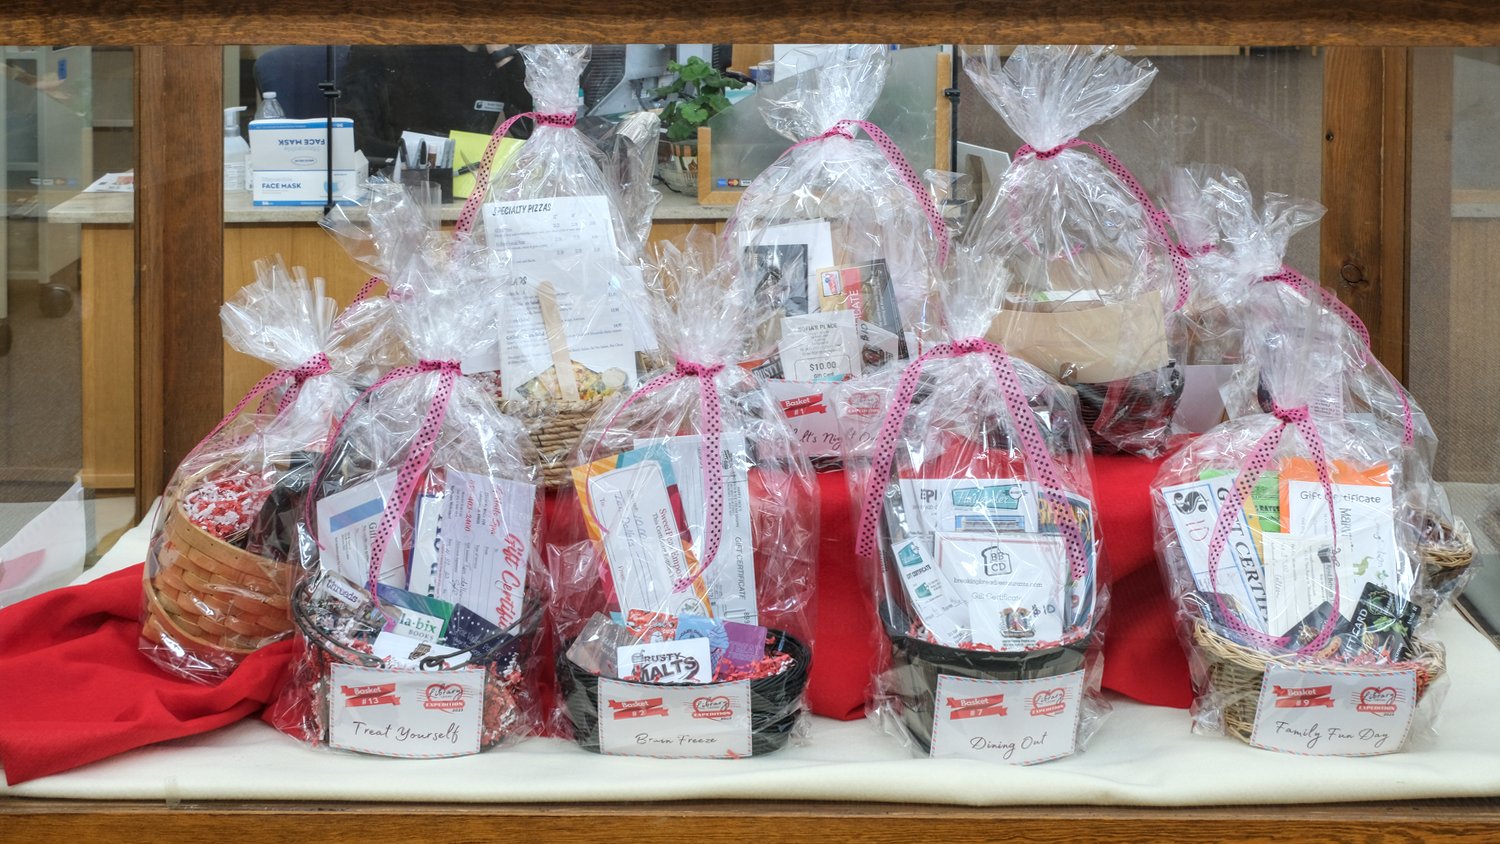 Library Lovers Expedition gift baskets on display.